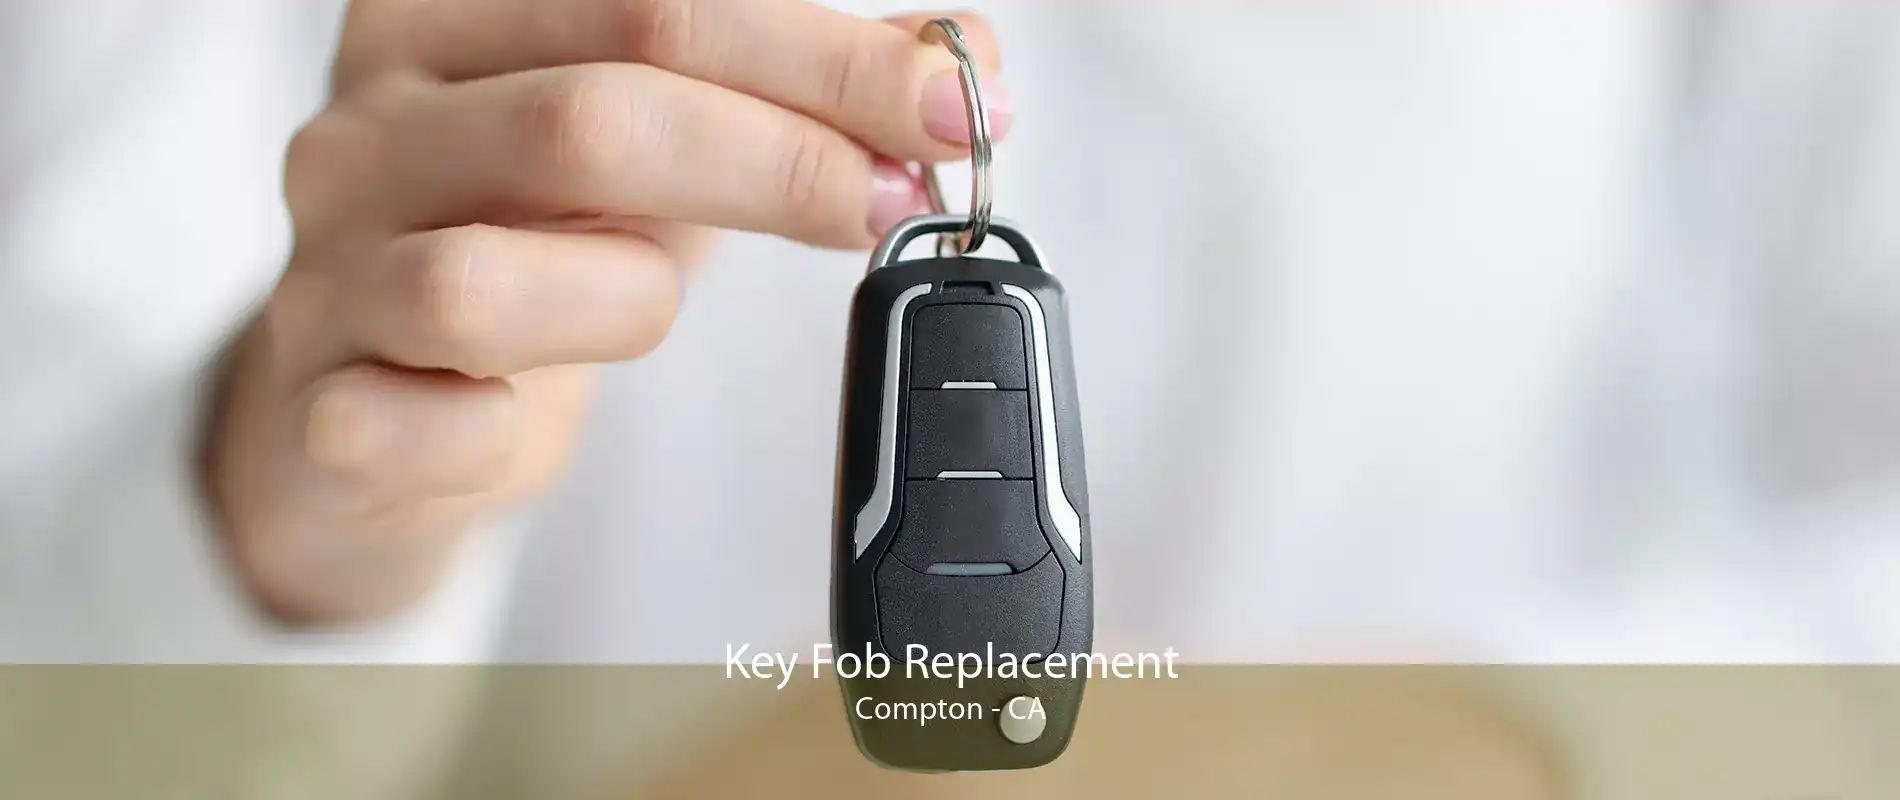 Key Fob Replacement Compton - CA